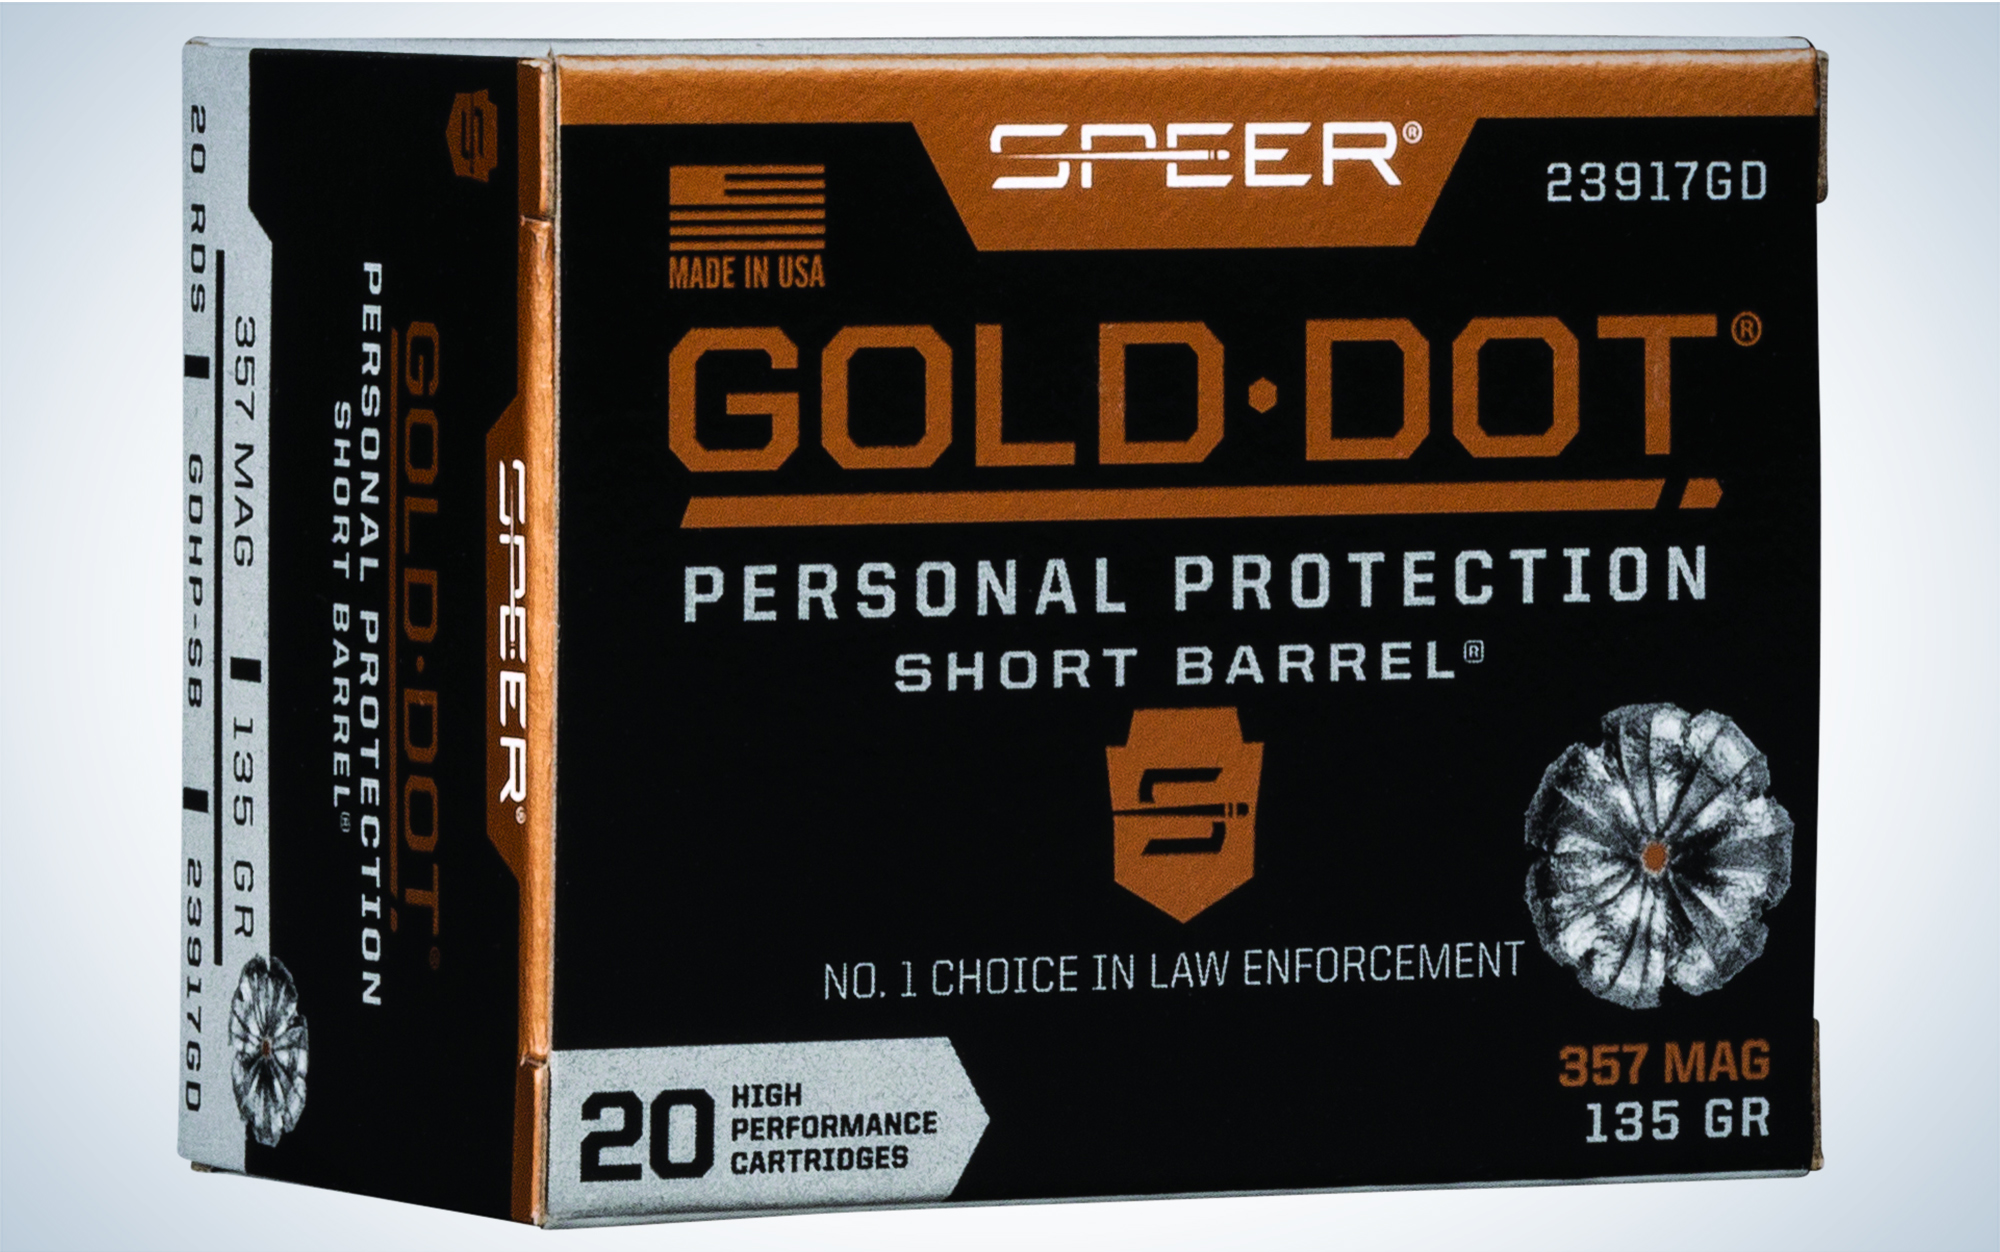 Speer Gold Dot Short Barrel Personal Protection 135 Grain JHP is best for revolvers.